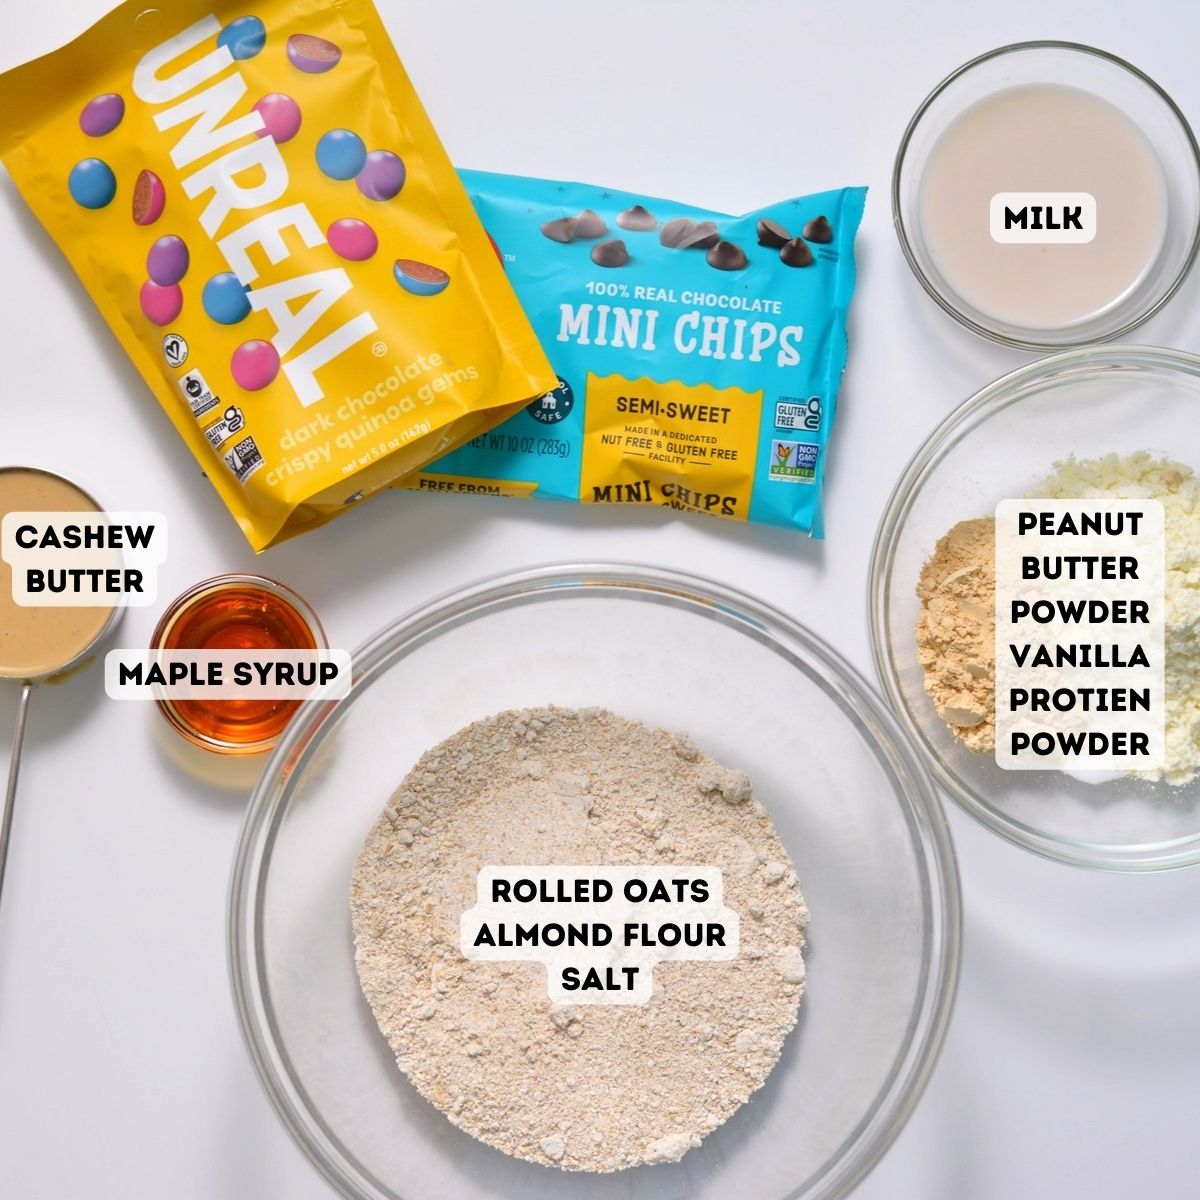 Ingredients including m and m's, chocolate chips, oats, almond flour, cashew butter, maple syrup, milk, peanut butter powder, and protein powder.